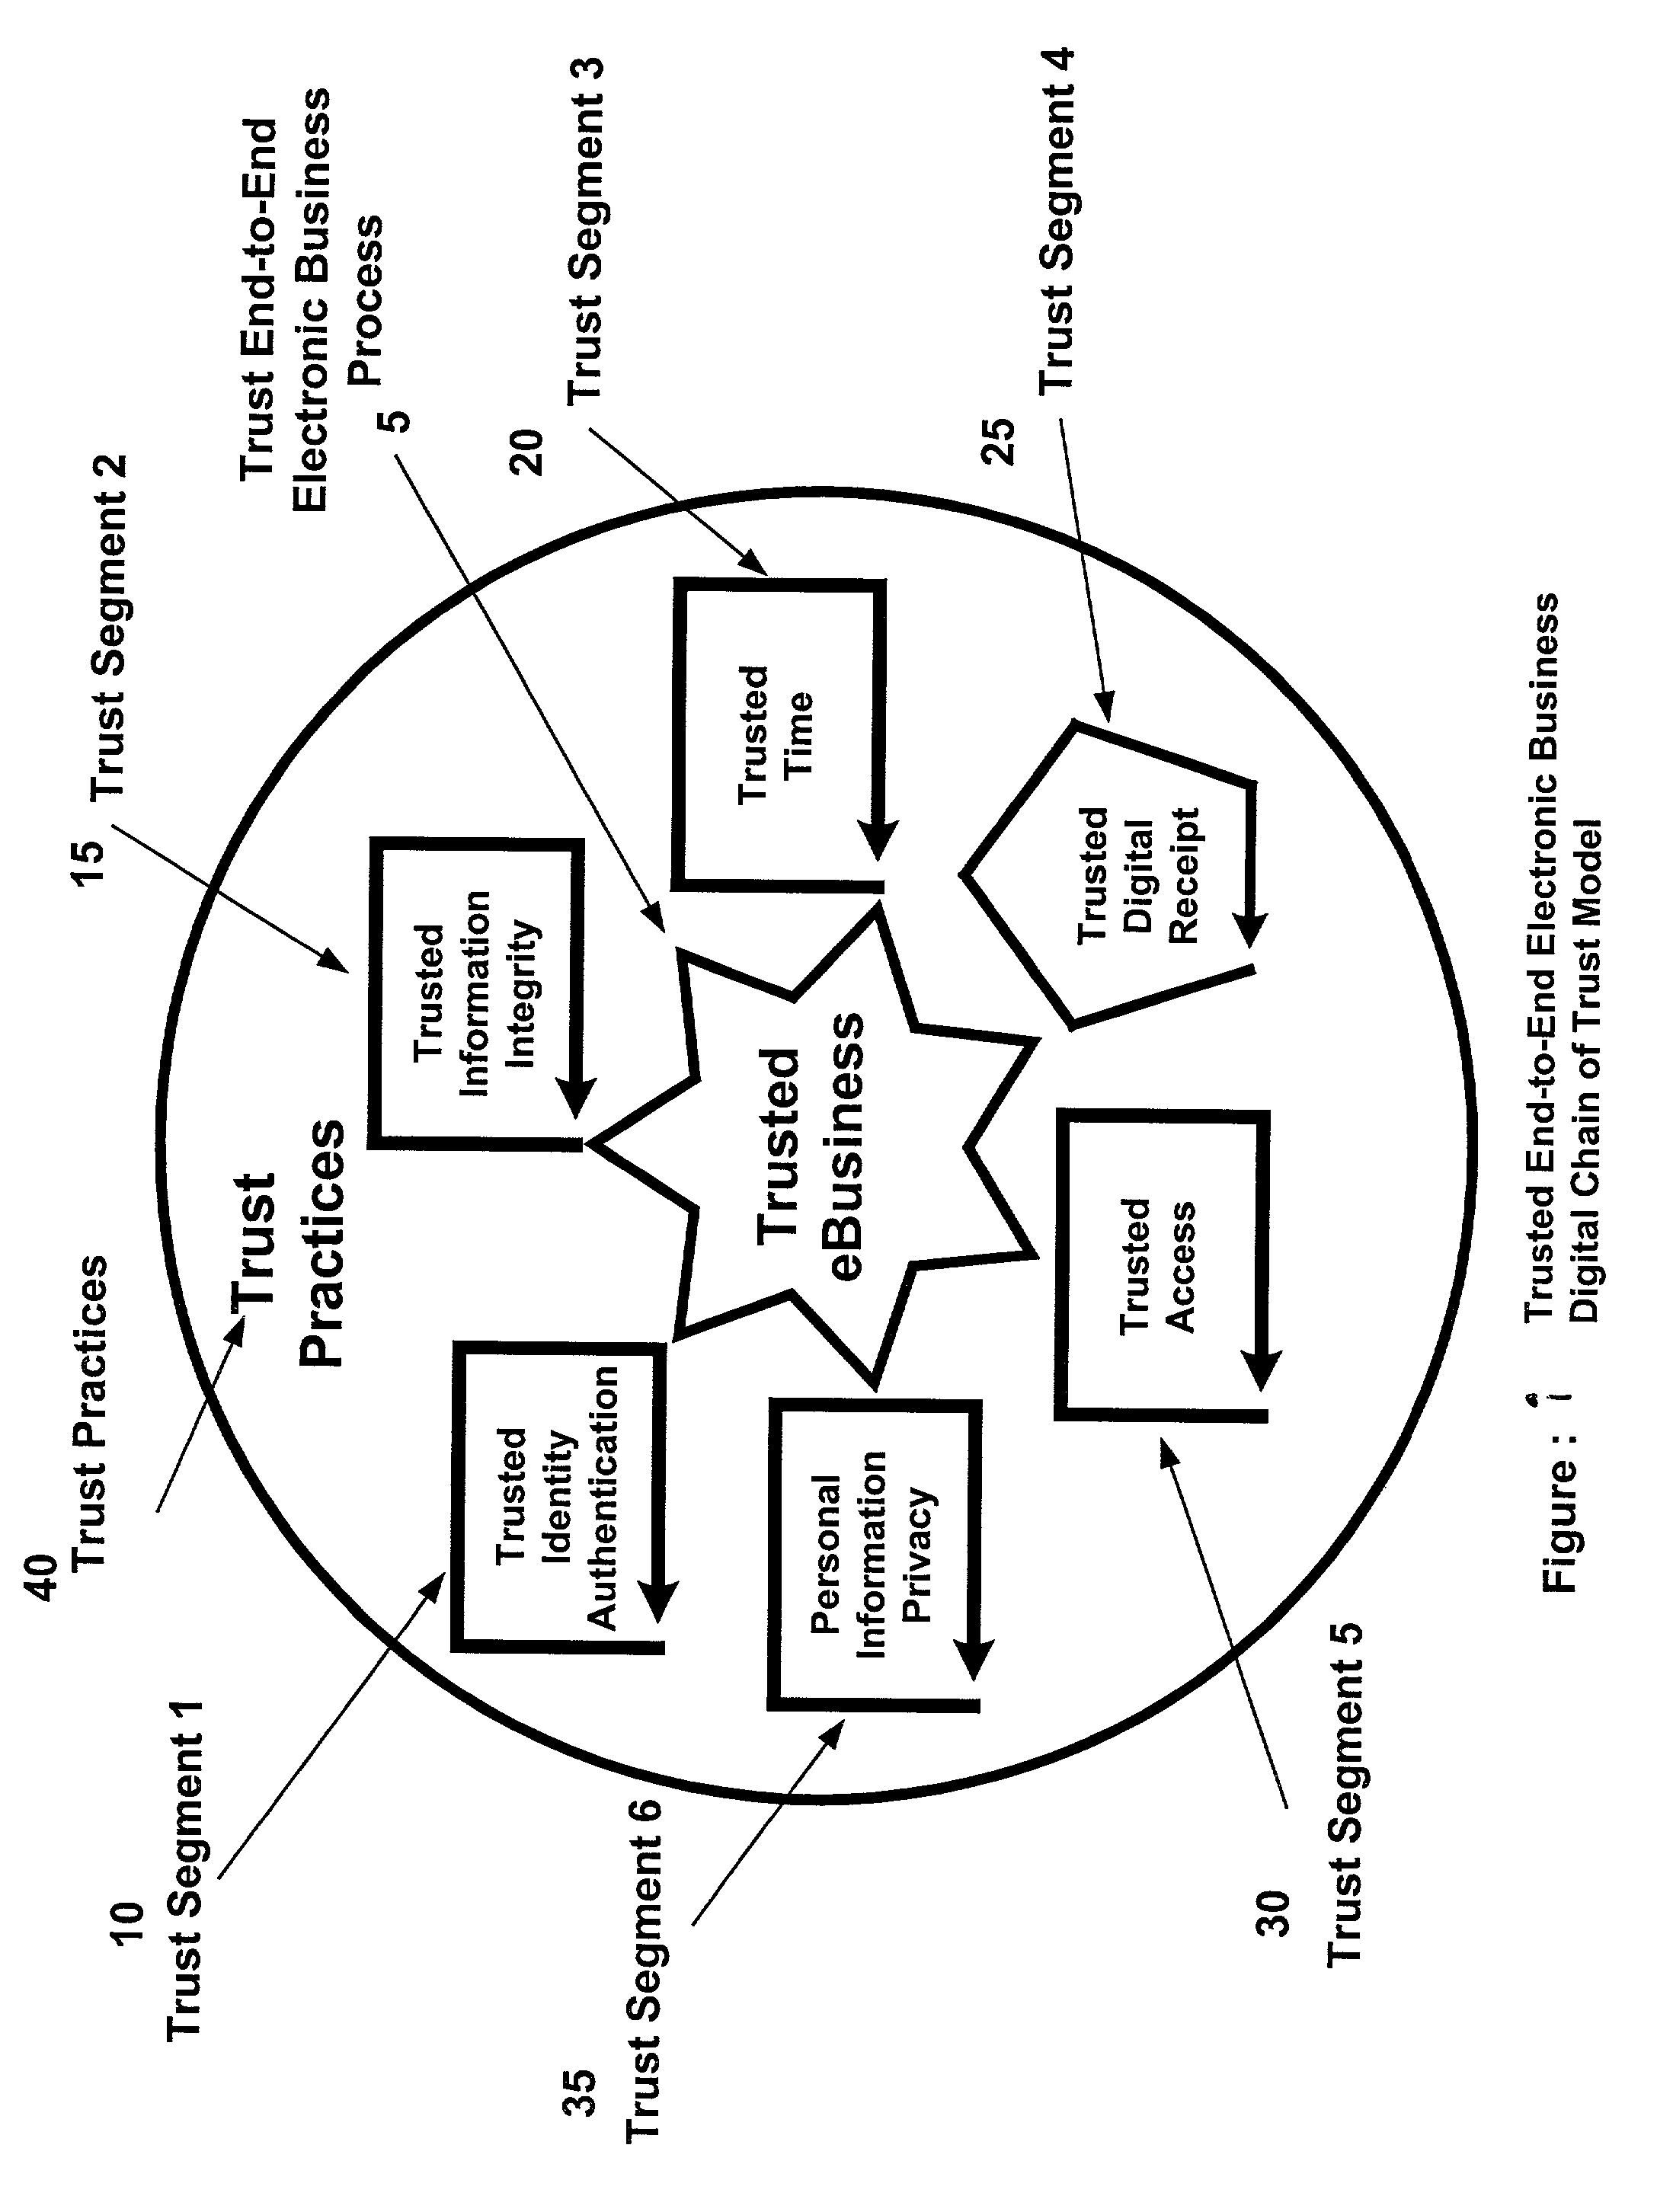 Digital chain of trust method for electronic commerce